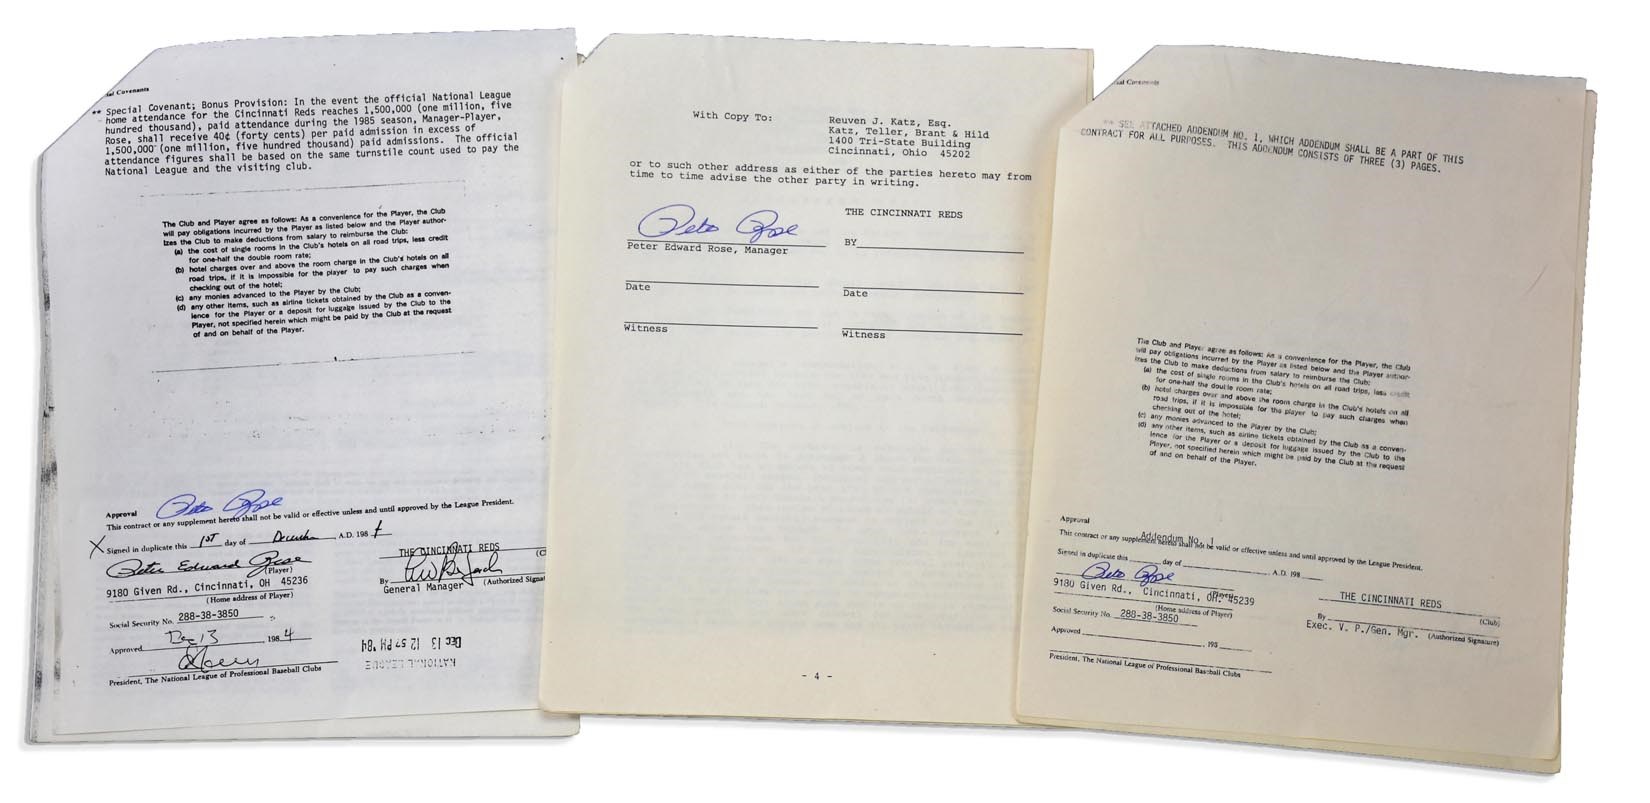 Pete Rose & Cincinnati Reds - Pete Rose's Final Contracts Archive - Likely from Reds Attorney